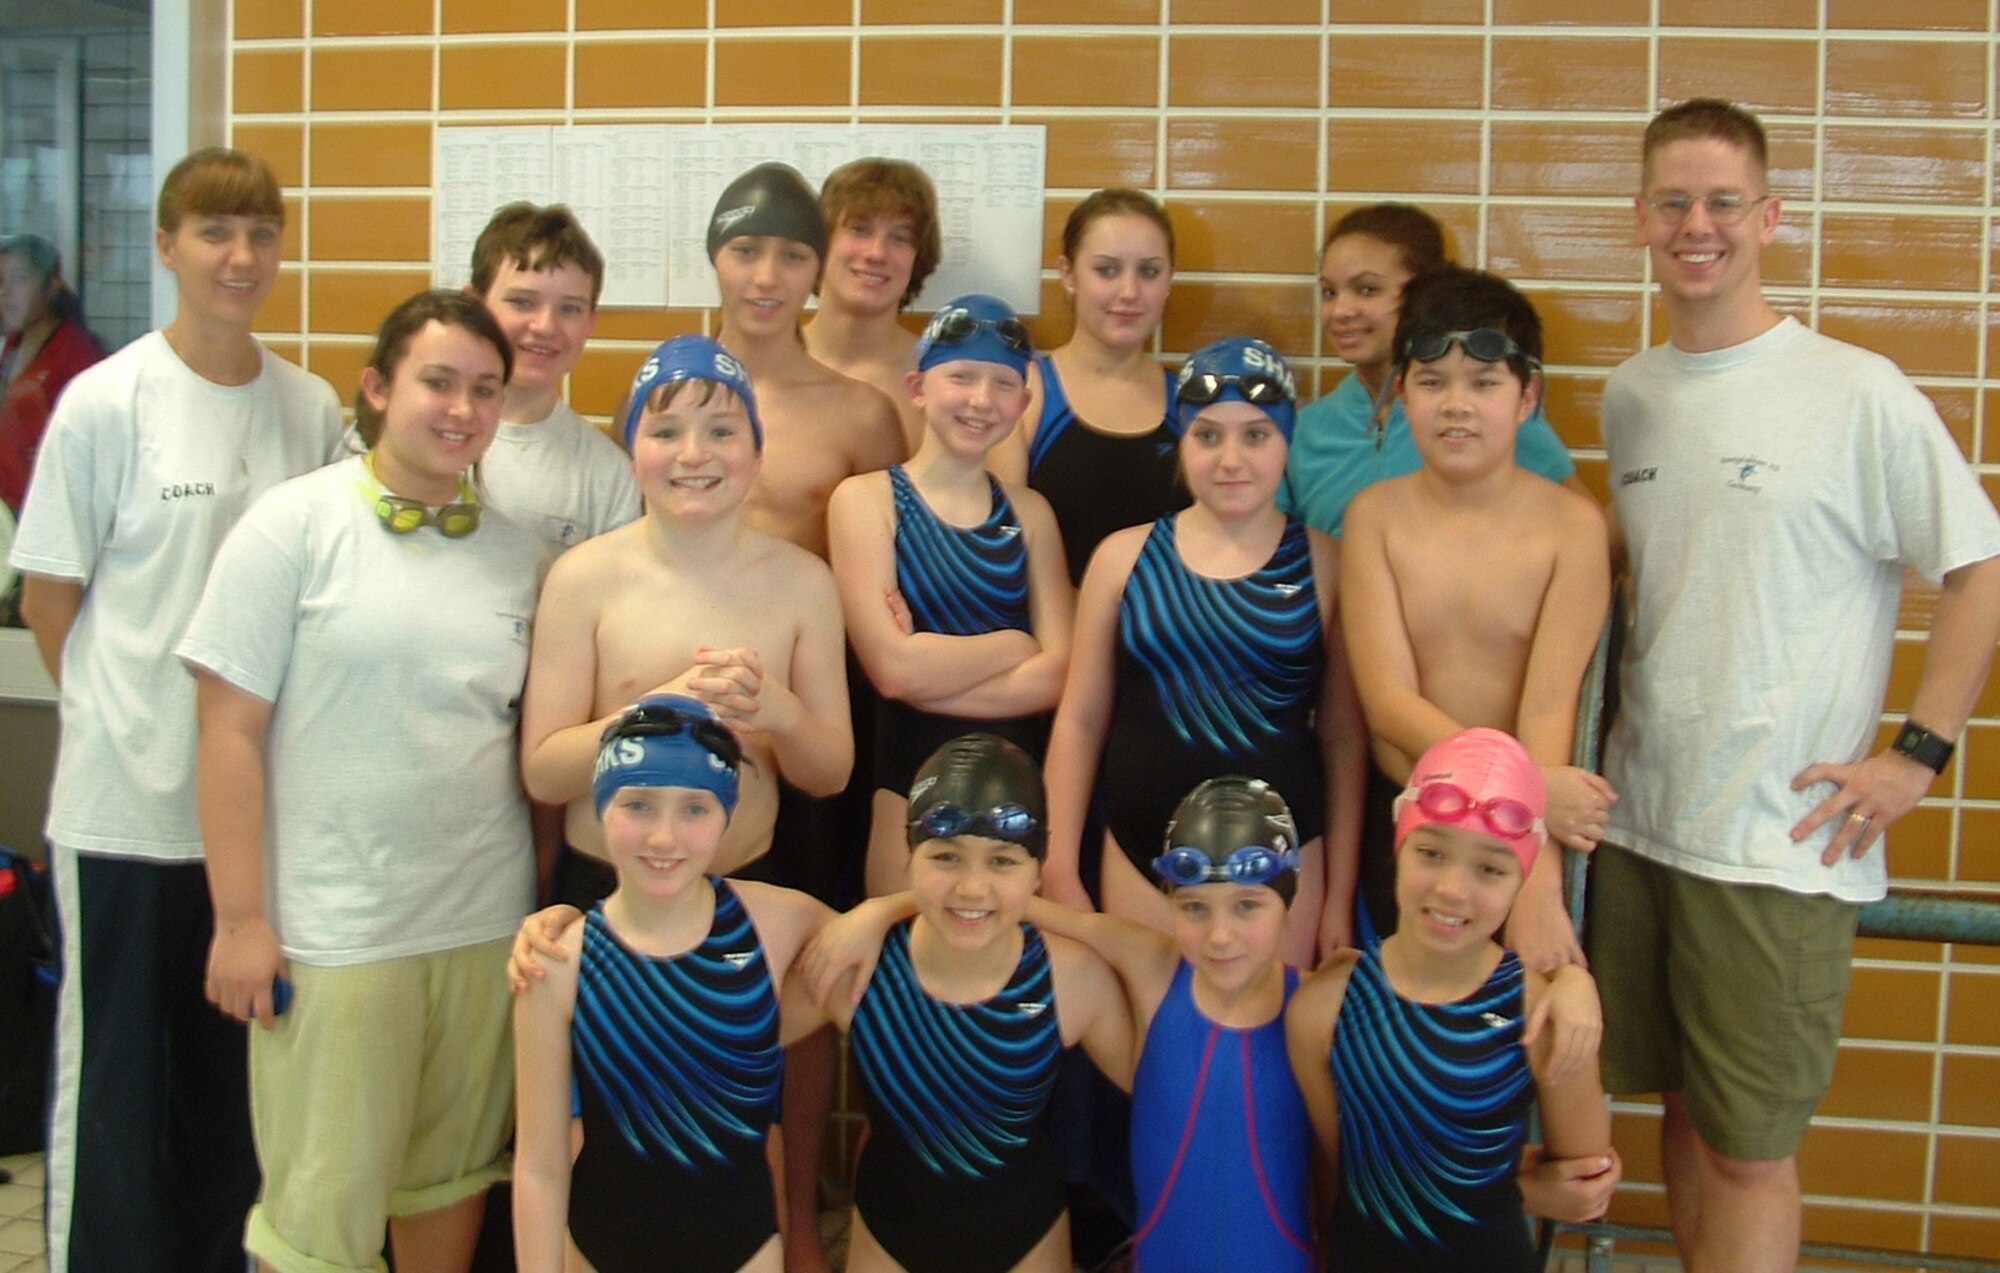 SPANGDAHLEM AIR BASE, Germany -- Members of the Eifel Sharks swim team take a moment to pose for a group photo at their Divisional Championships. The team has been around for 20 years and is a part of the European Forces Swim League. The Eifel Sharks swim team is looking for childe ages six to 18 who can swim 25 meters to join their ranks for the upcoming season. (Courtesy photo)